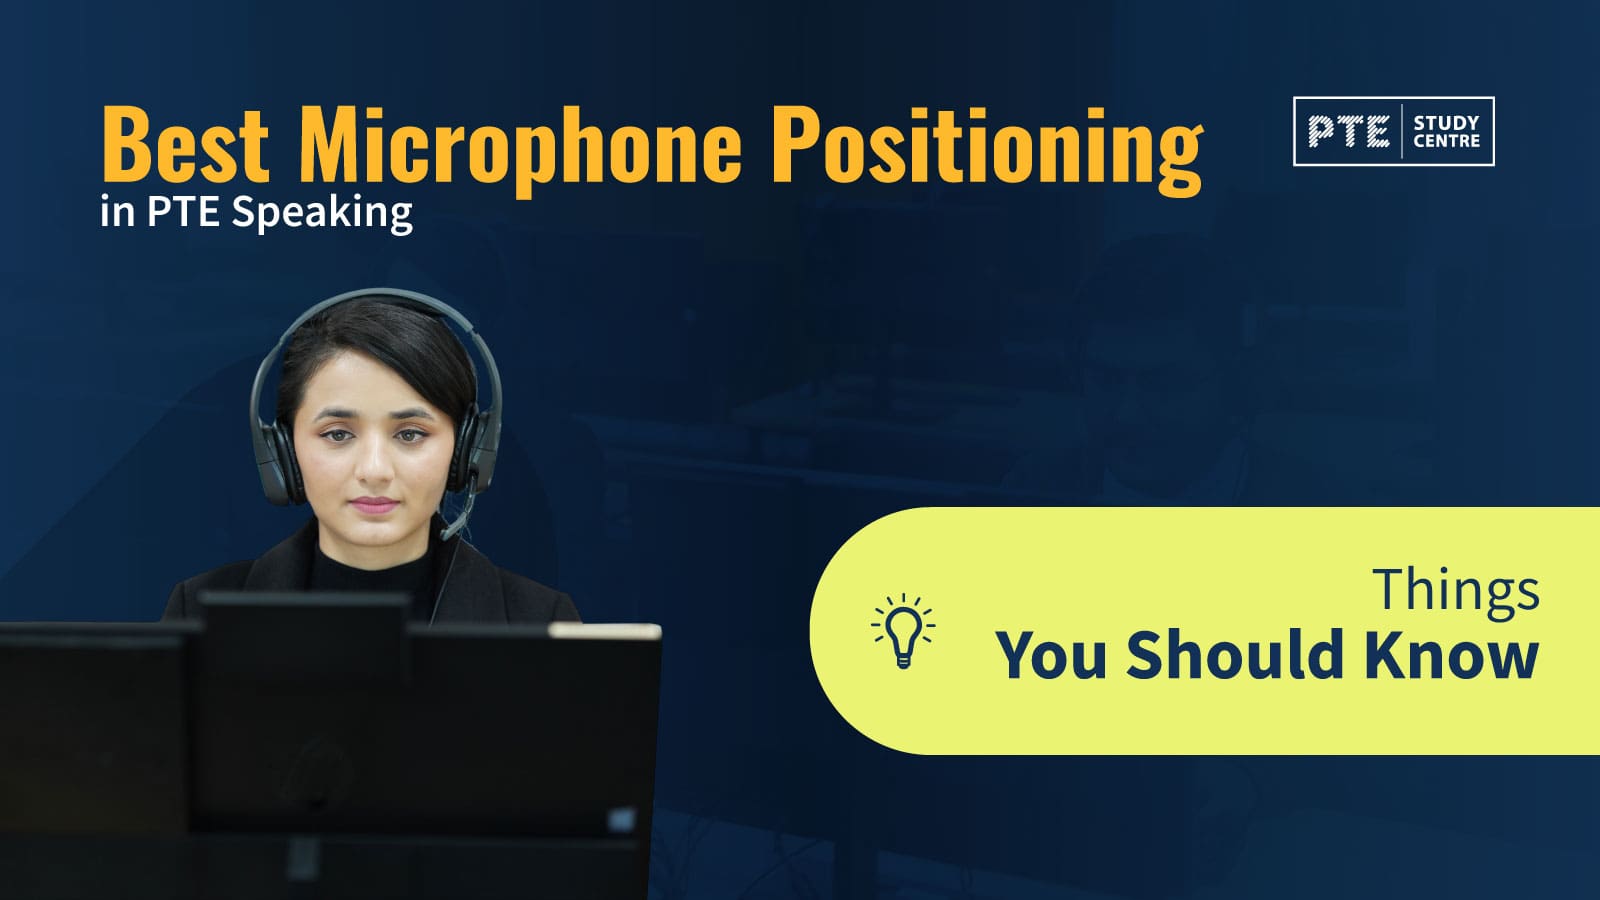 Best Microphone Positioning in PTE Speaking